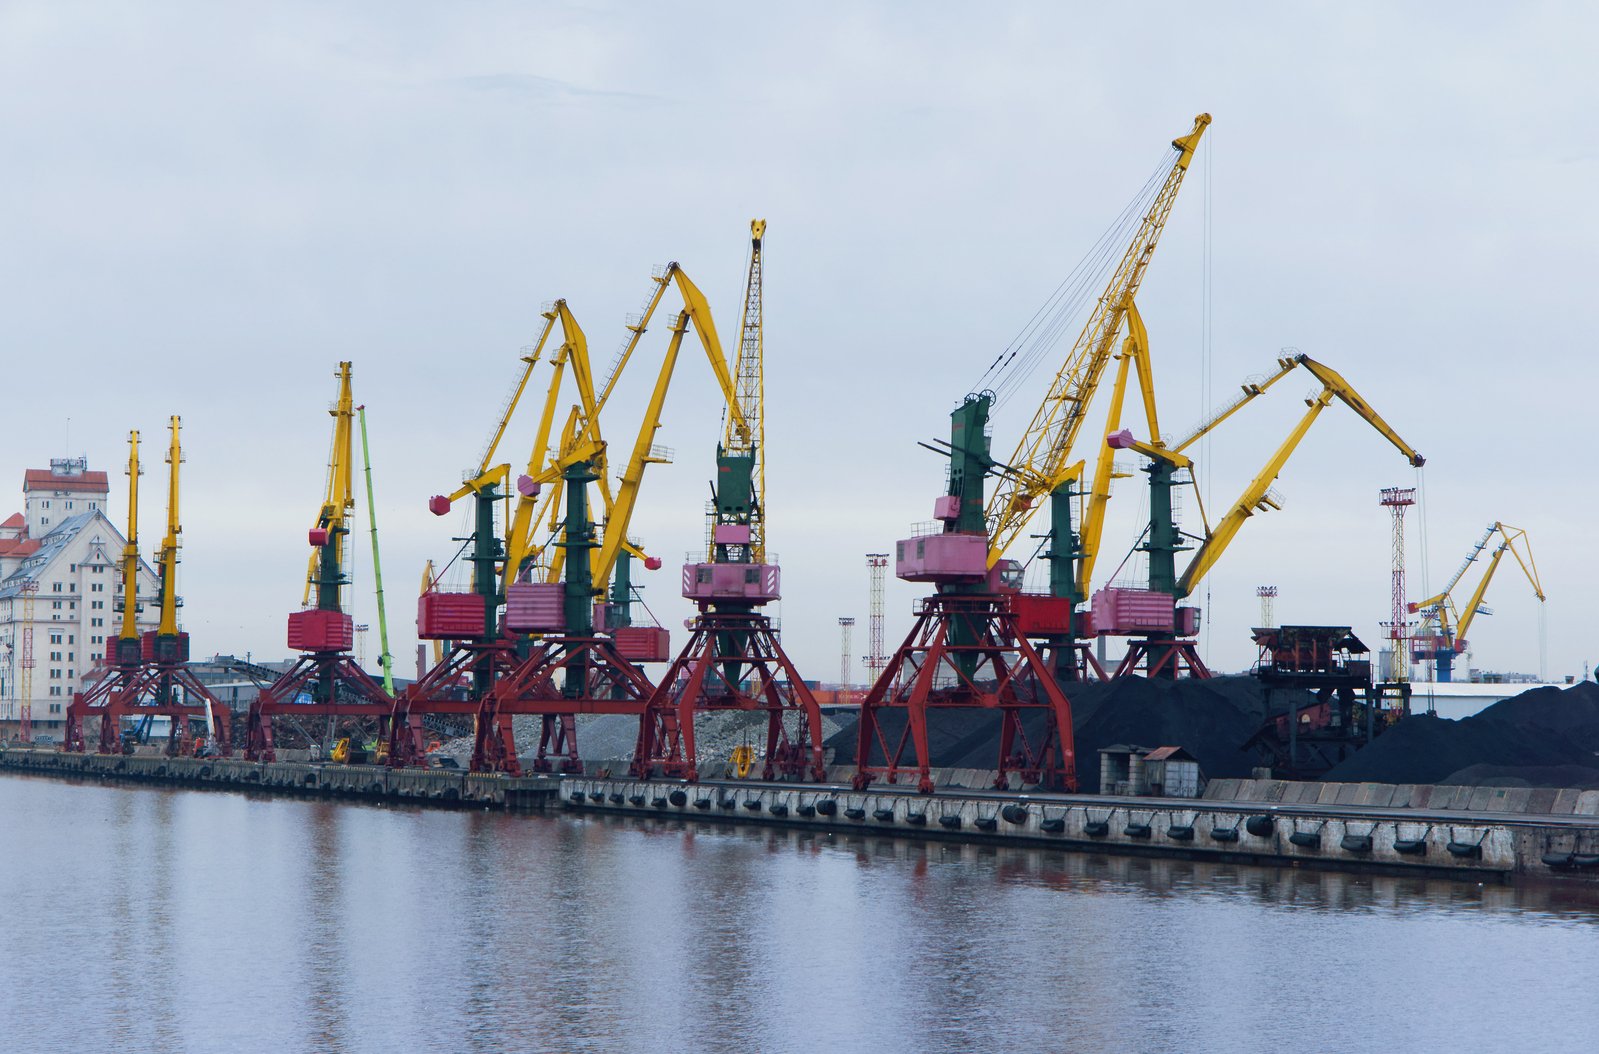 a dock holding multiple large cranes in a harbor